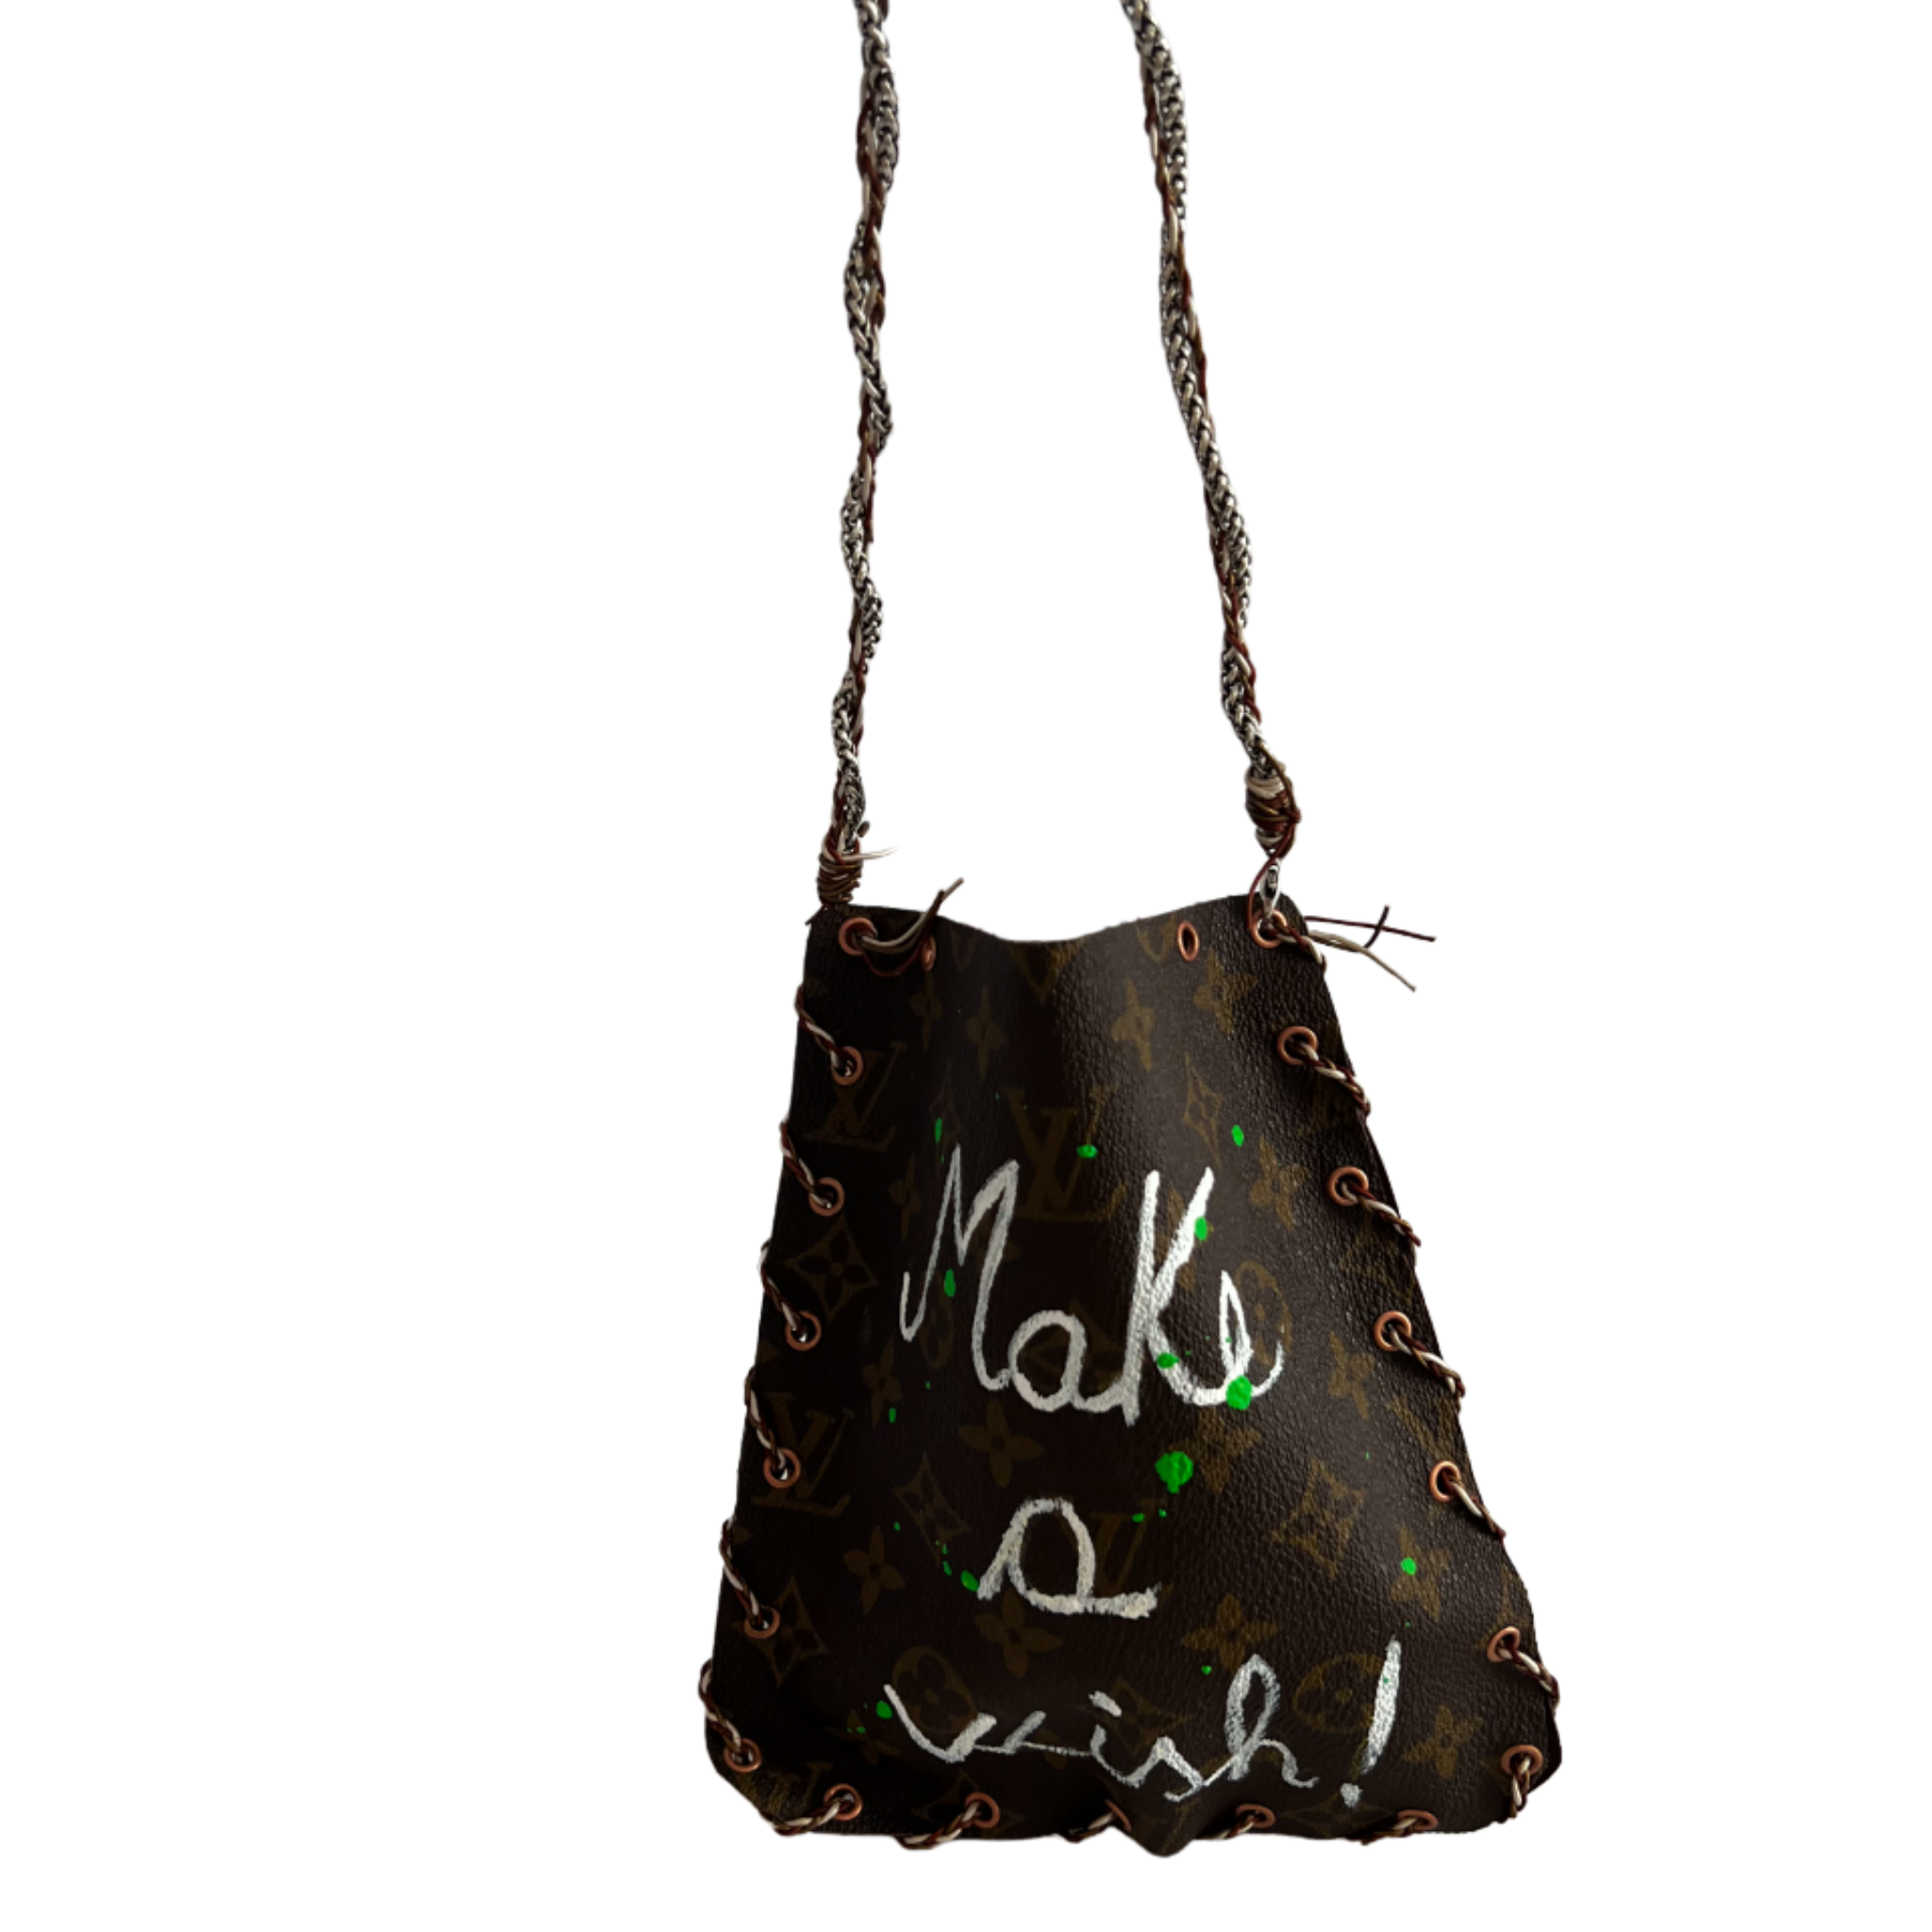 Make A Wish - Hand-Painted Remodeled LV Bag – The Label Official